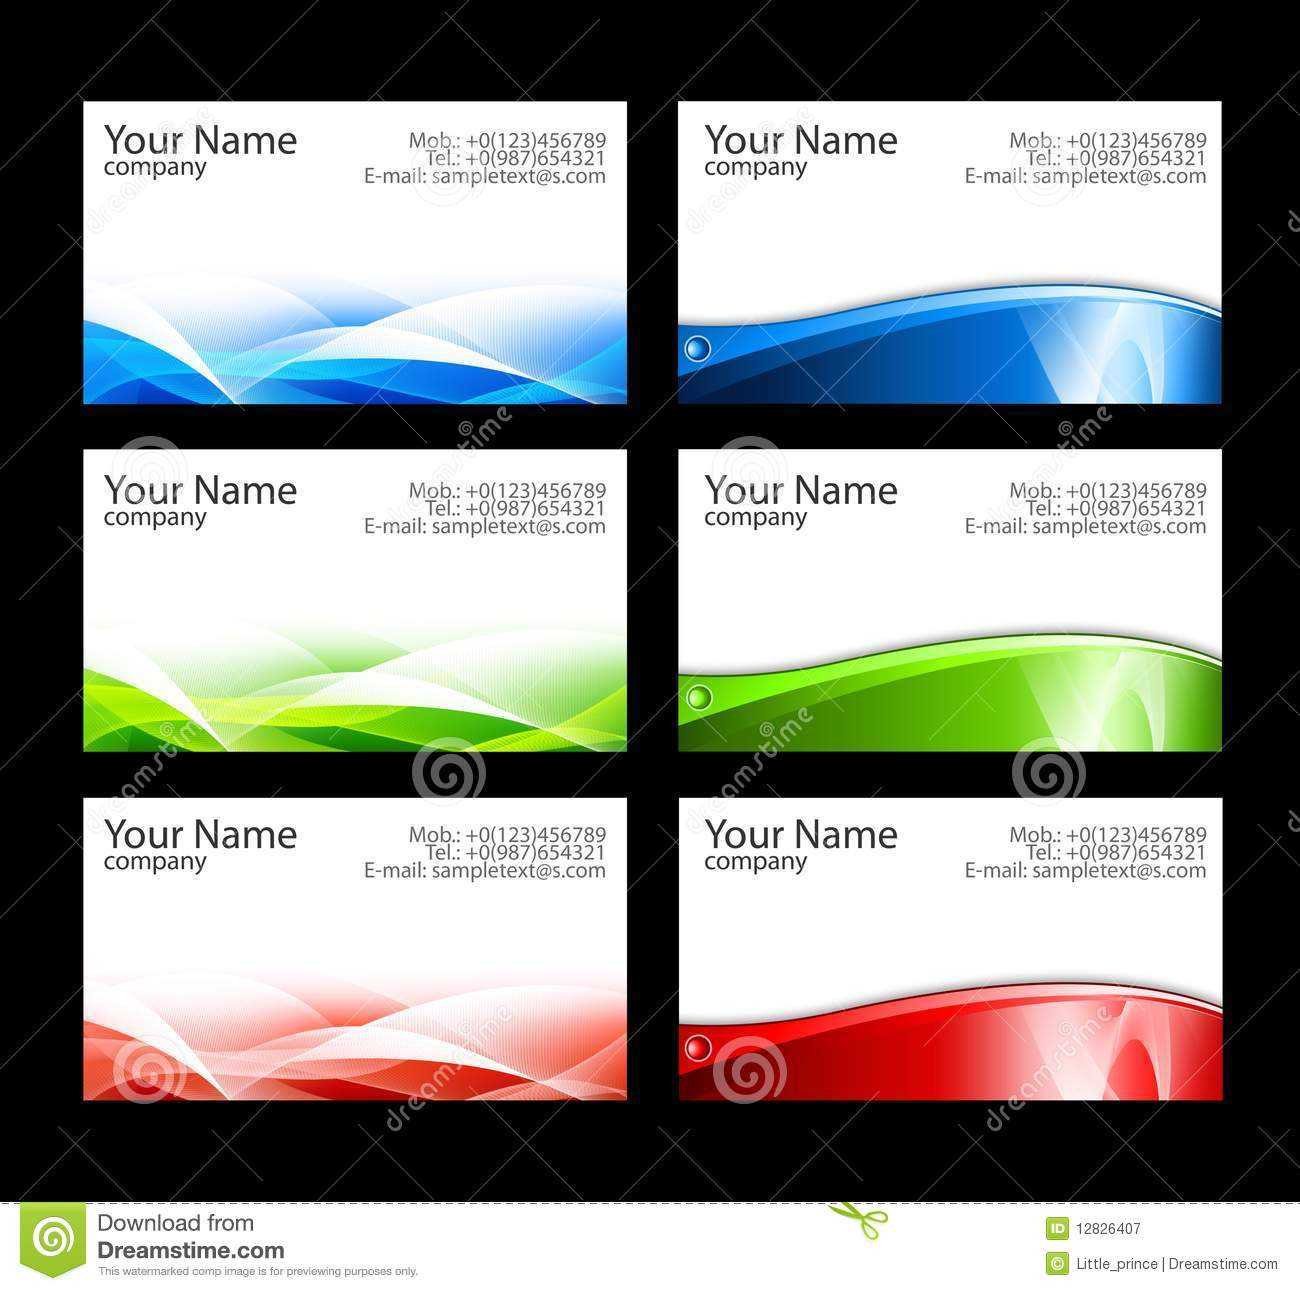 15 Free Avery Business Card Templates Images – Free Business Intended For Free Business Cards Templates For Word